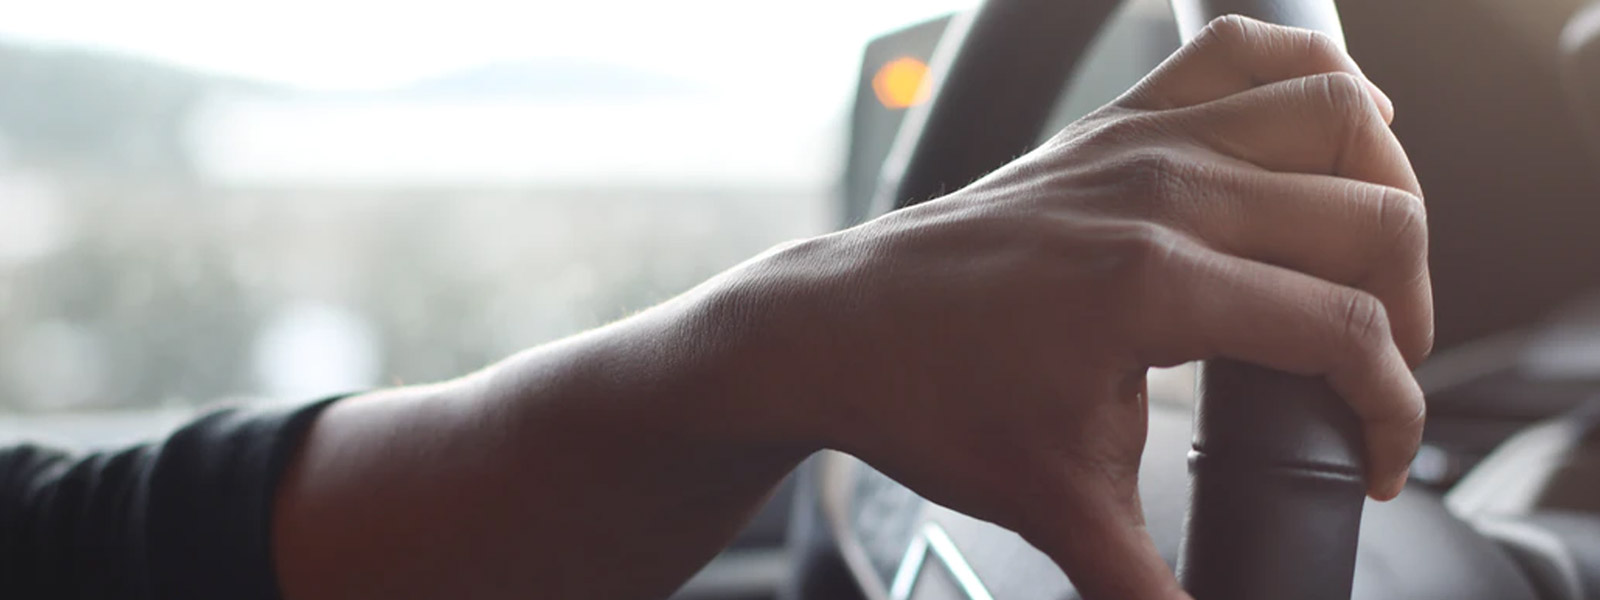 Close up view of hand on steering wheel | Auto Insurance